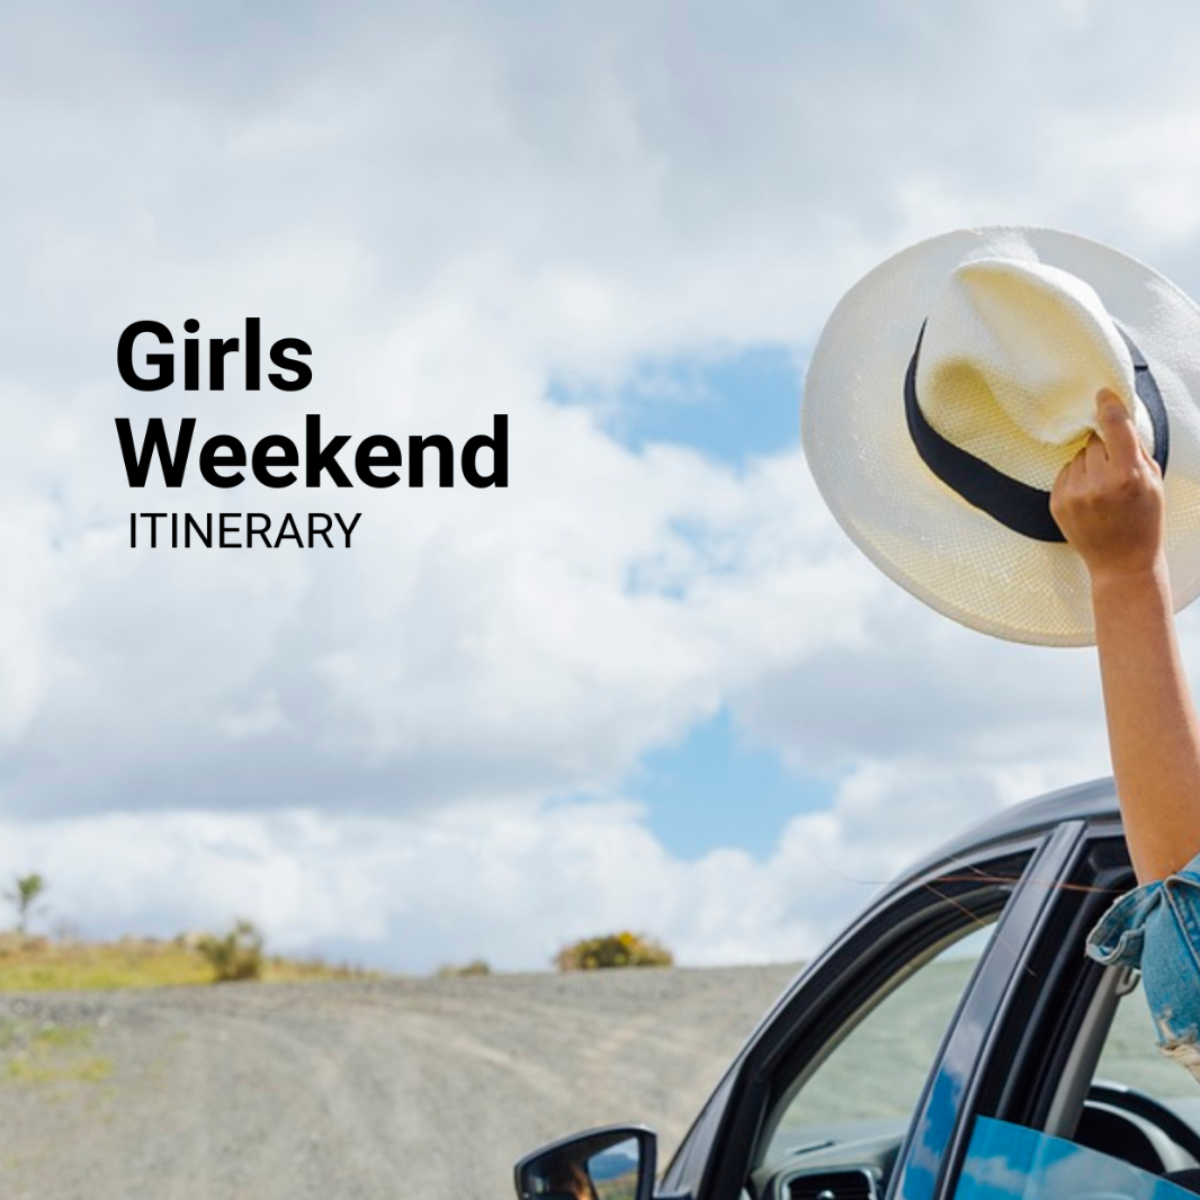 Girls Weekend Itinerary Template